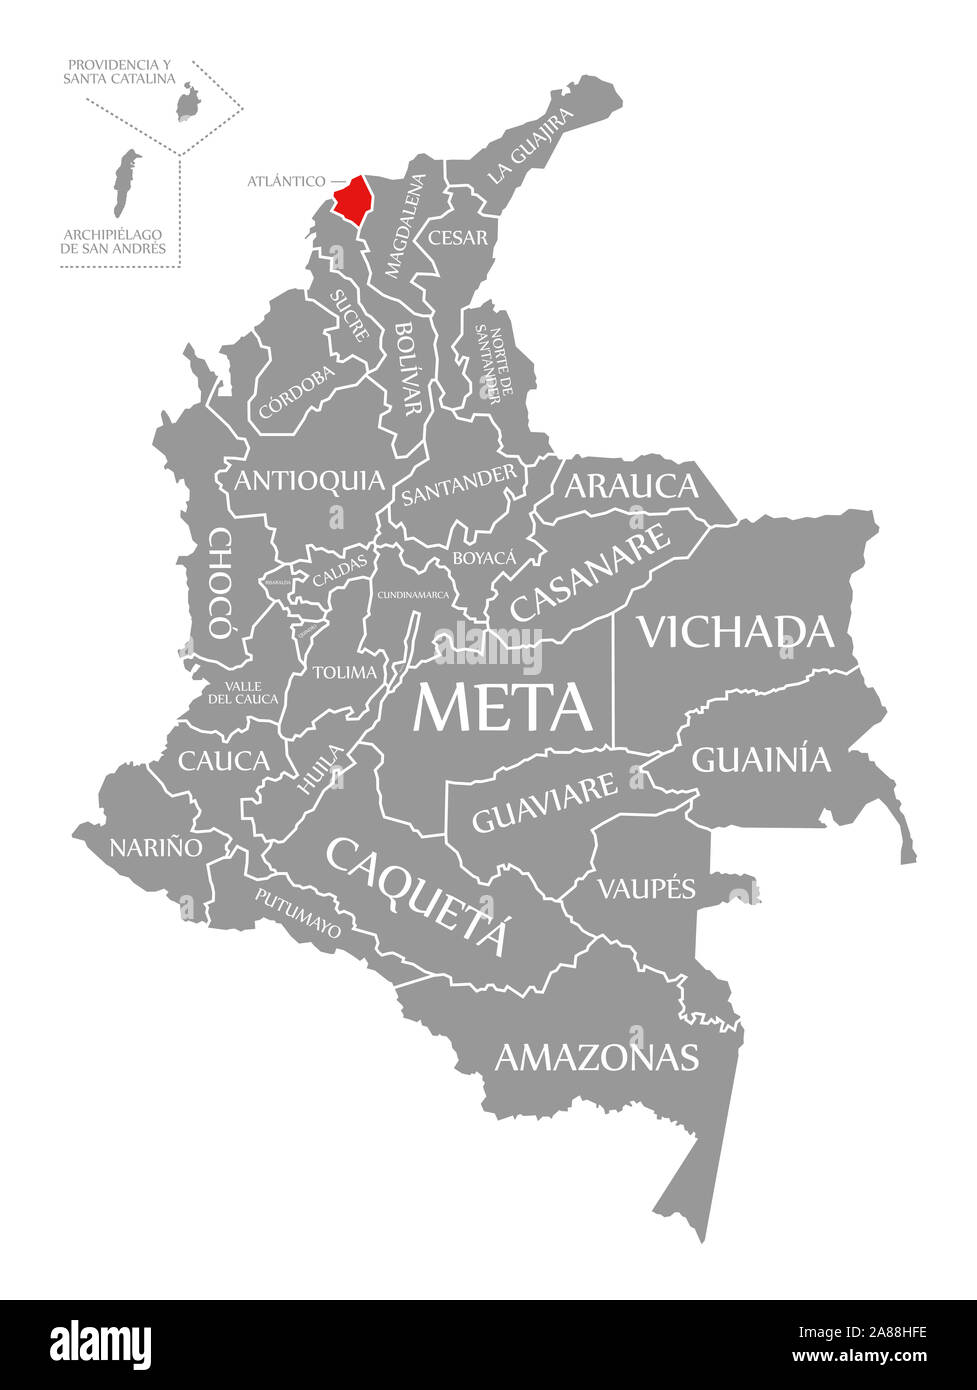 Atlantico red highlighted in map of Colombia Stock Photo